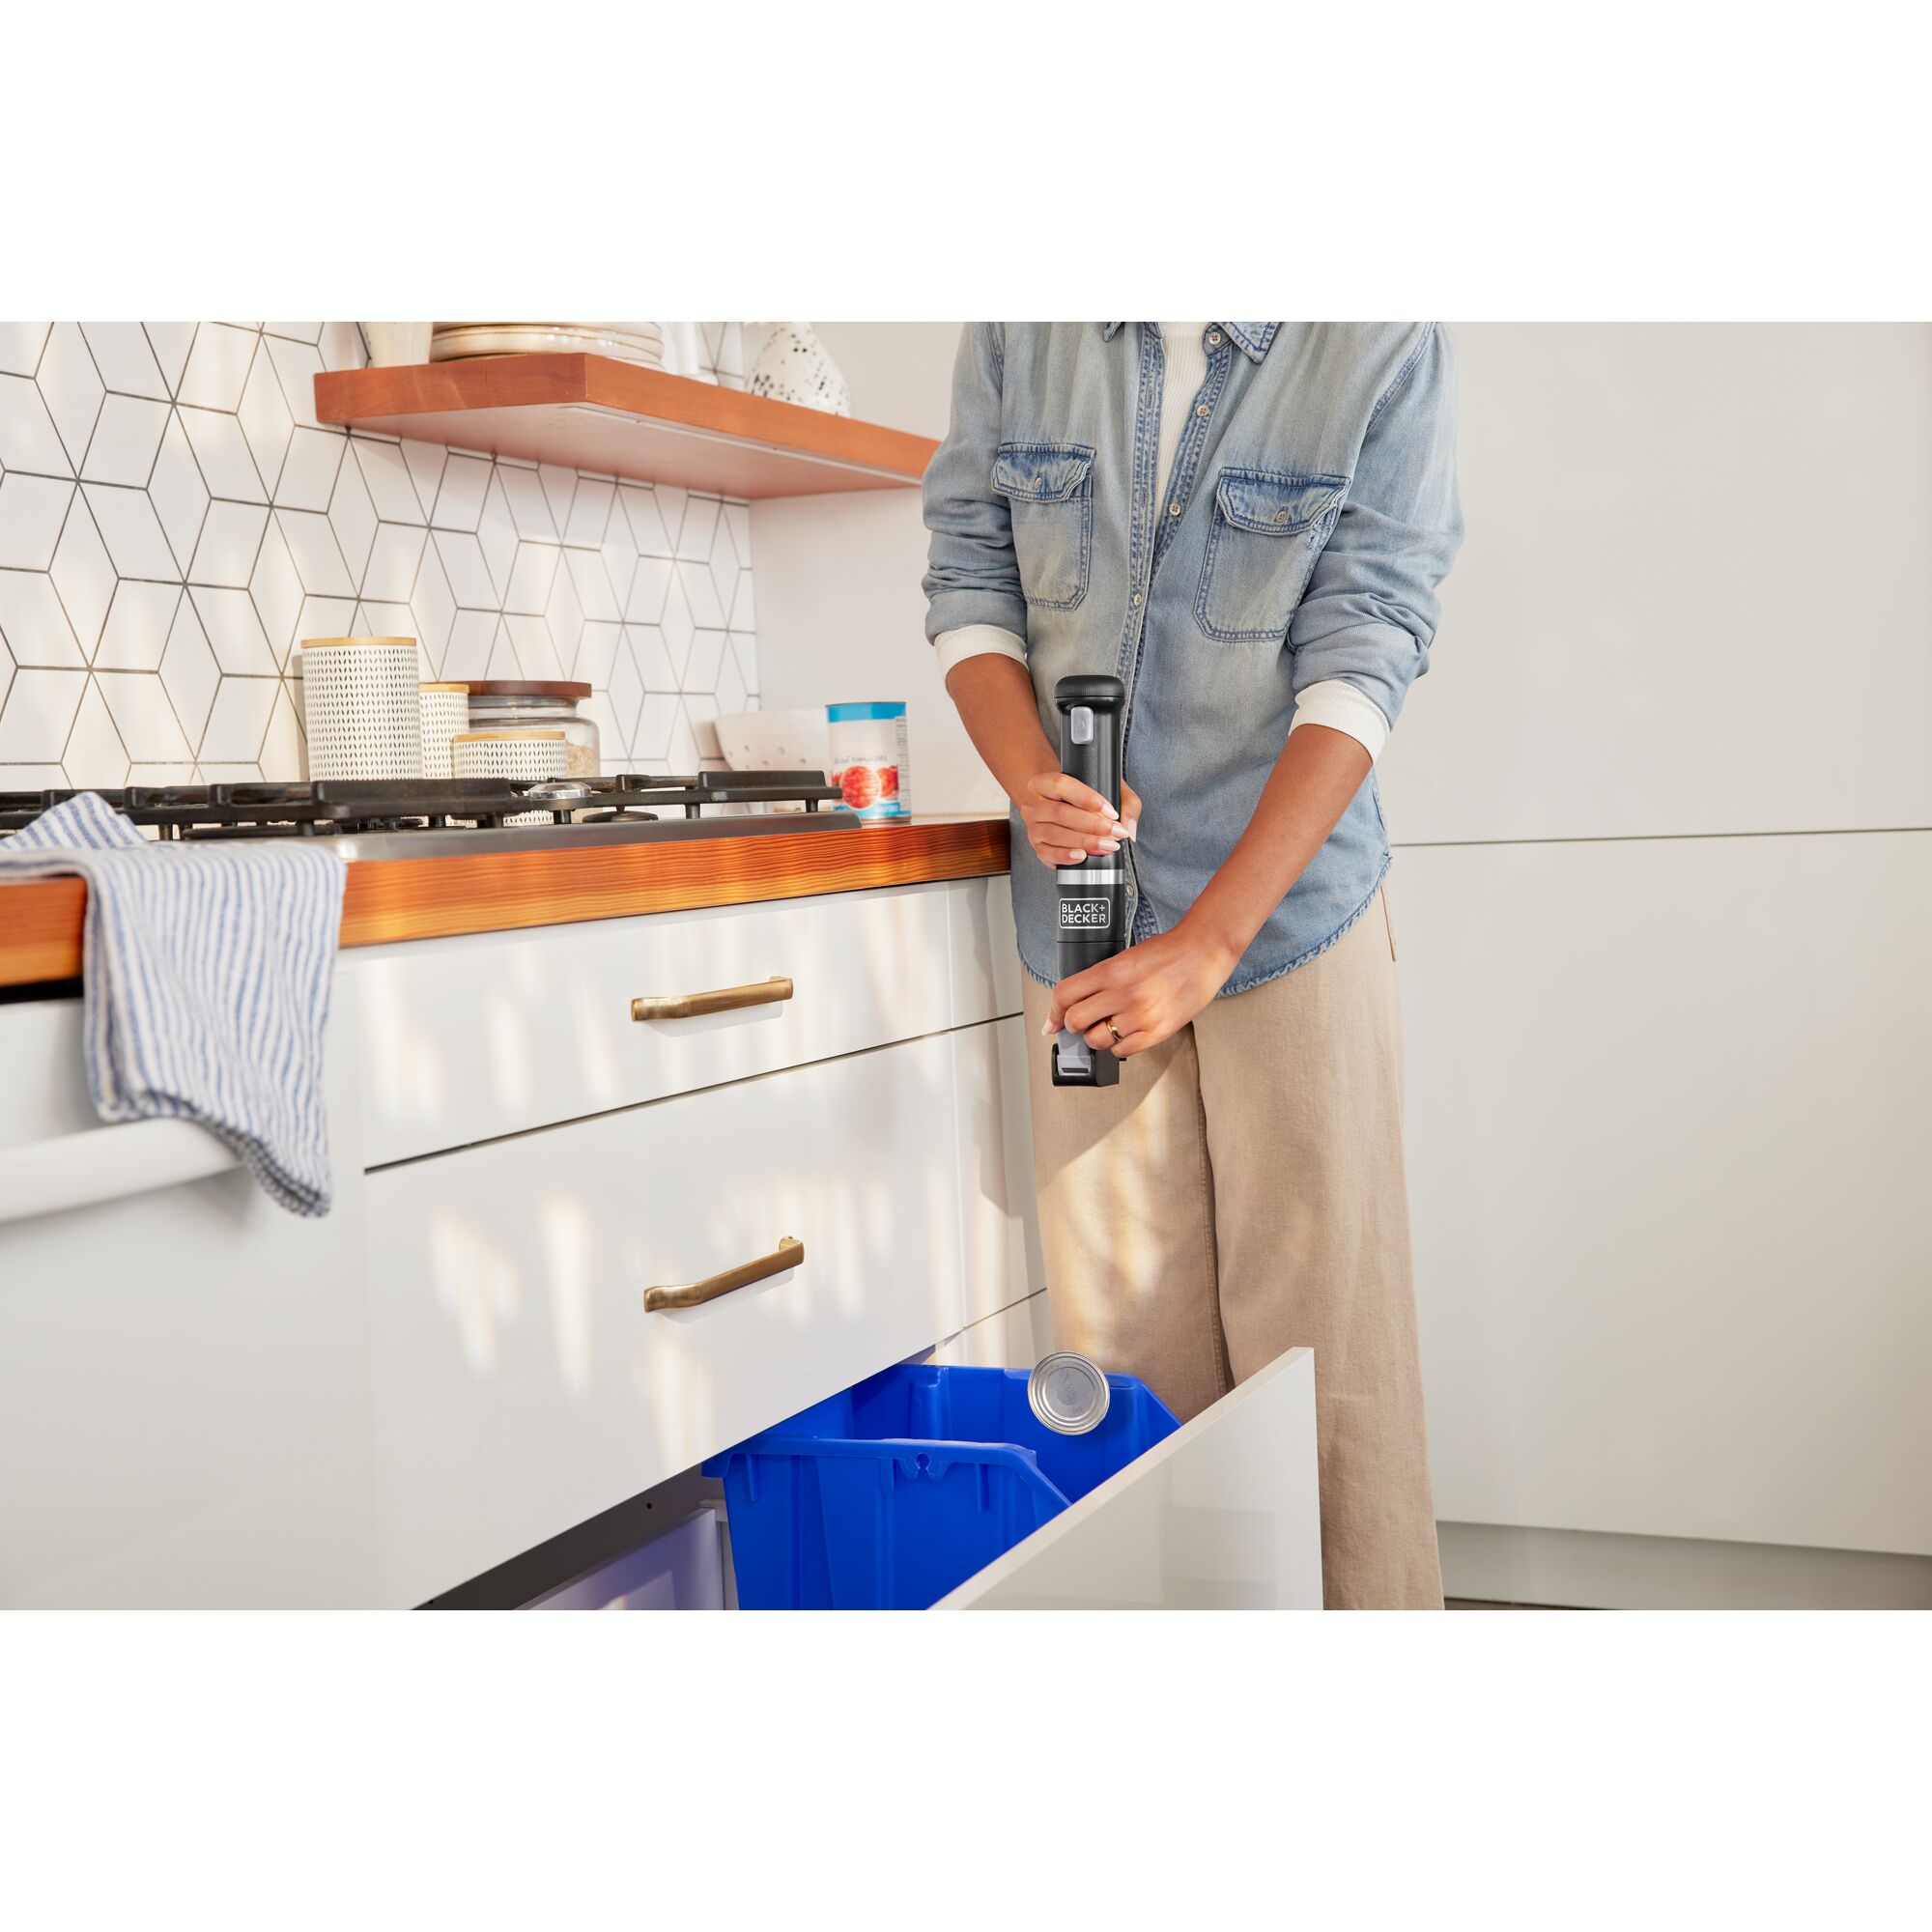 Talent lifting the lever on the black, BLACK+DECKER kitchen wand can opener to discharge the can lid in to the recycling bin